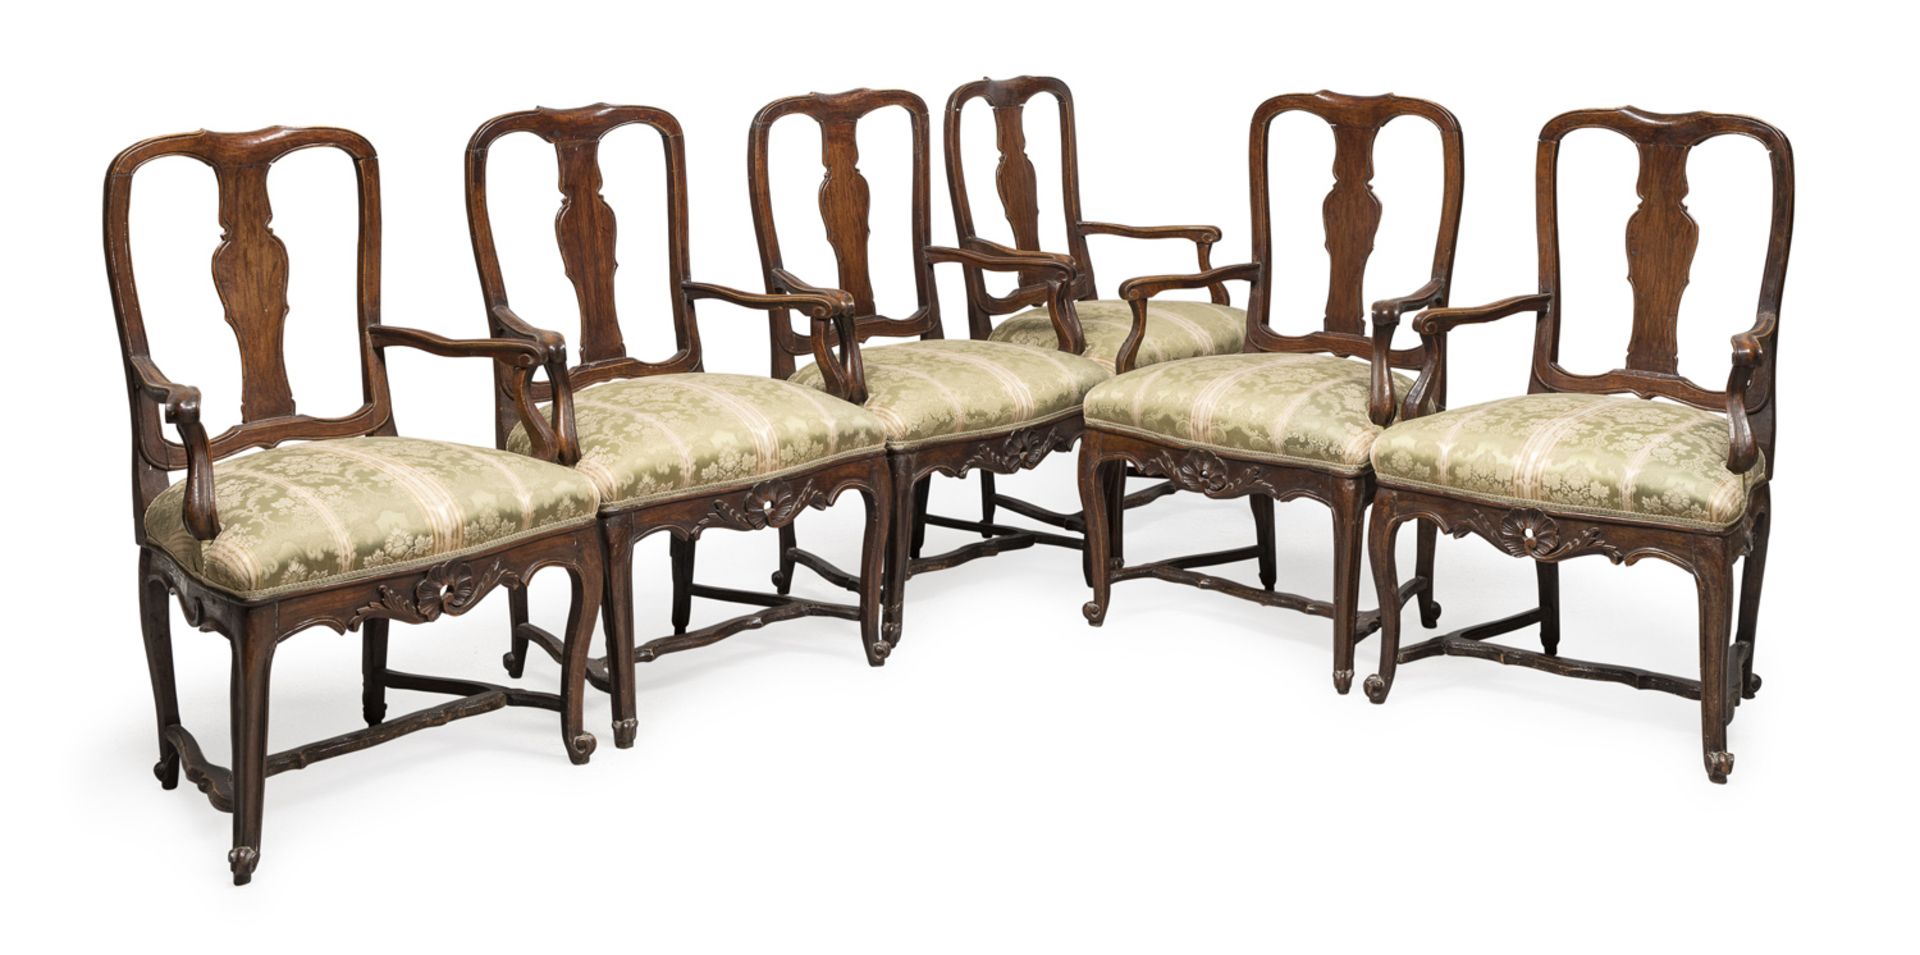 SIX ARMCHAIRS NORTHERN ITALY 18th CENTURY